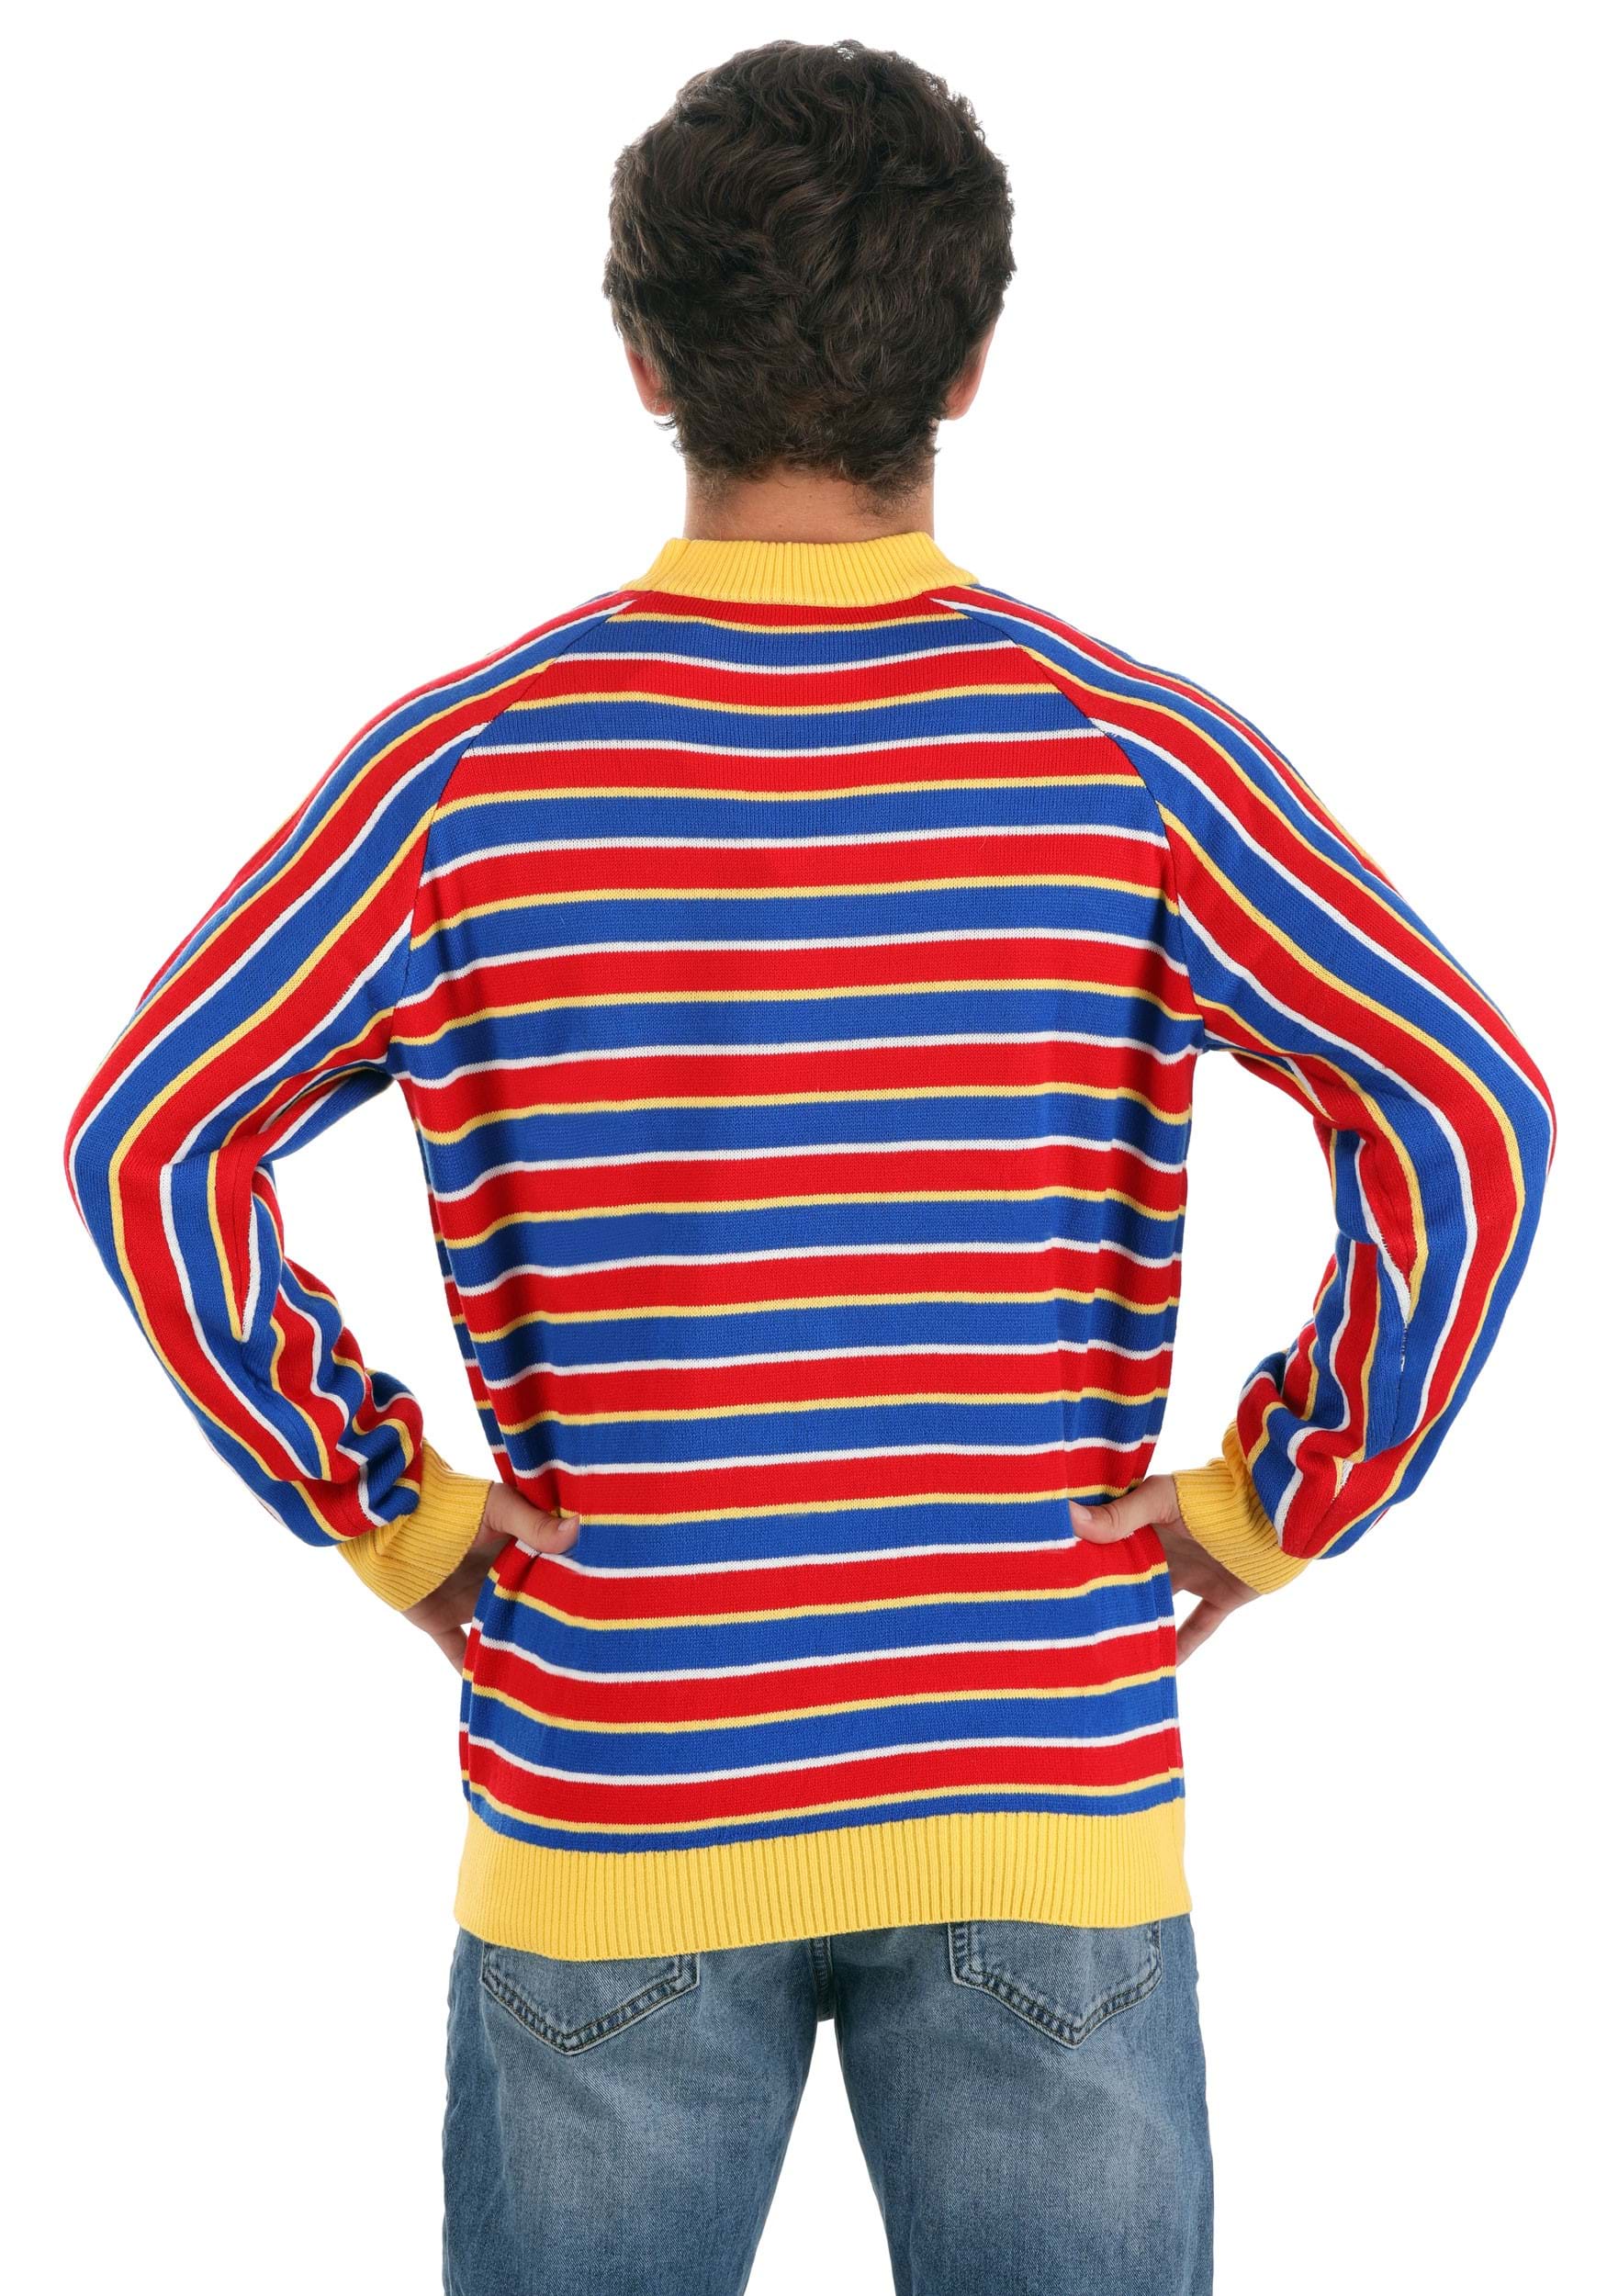 Sesame Street Ernie Cosplay Knit Sweater For Adults